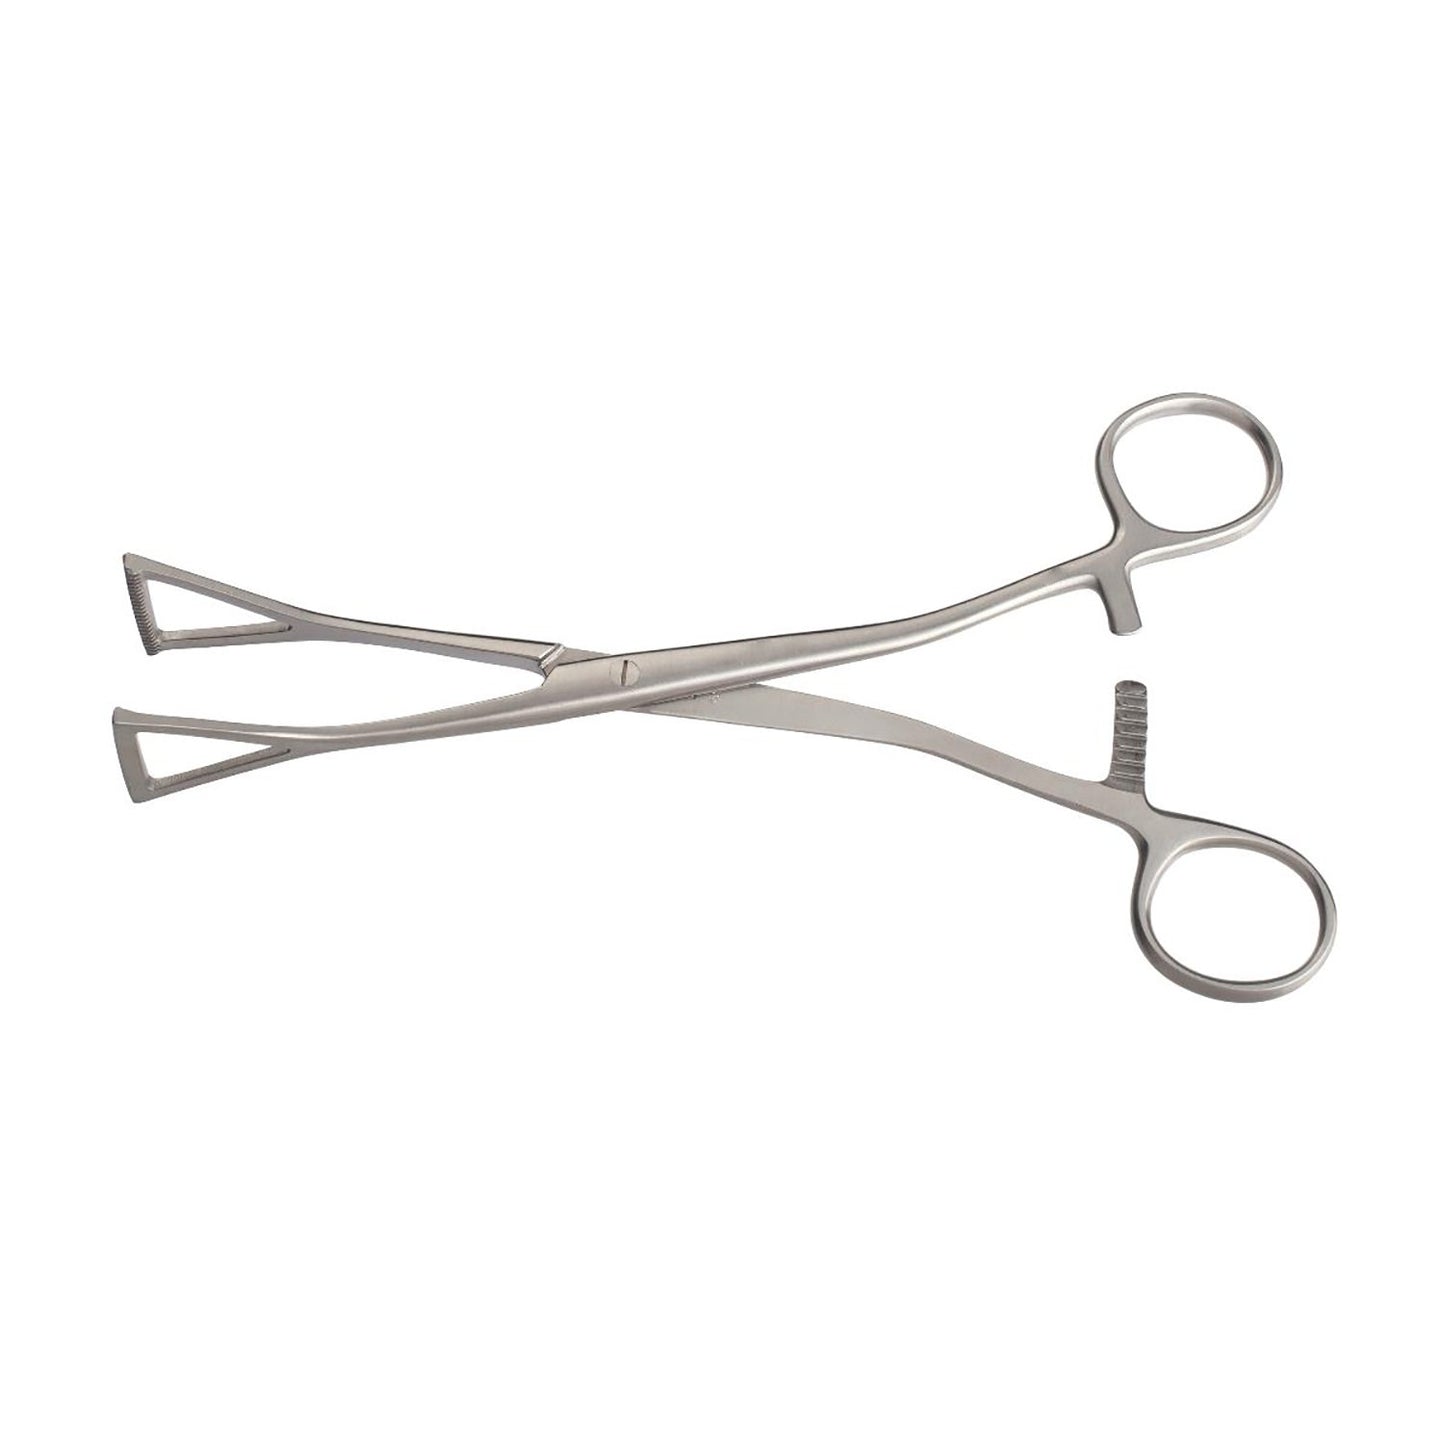 Collins (Duval-crile) Forceps